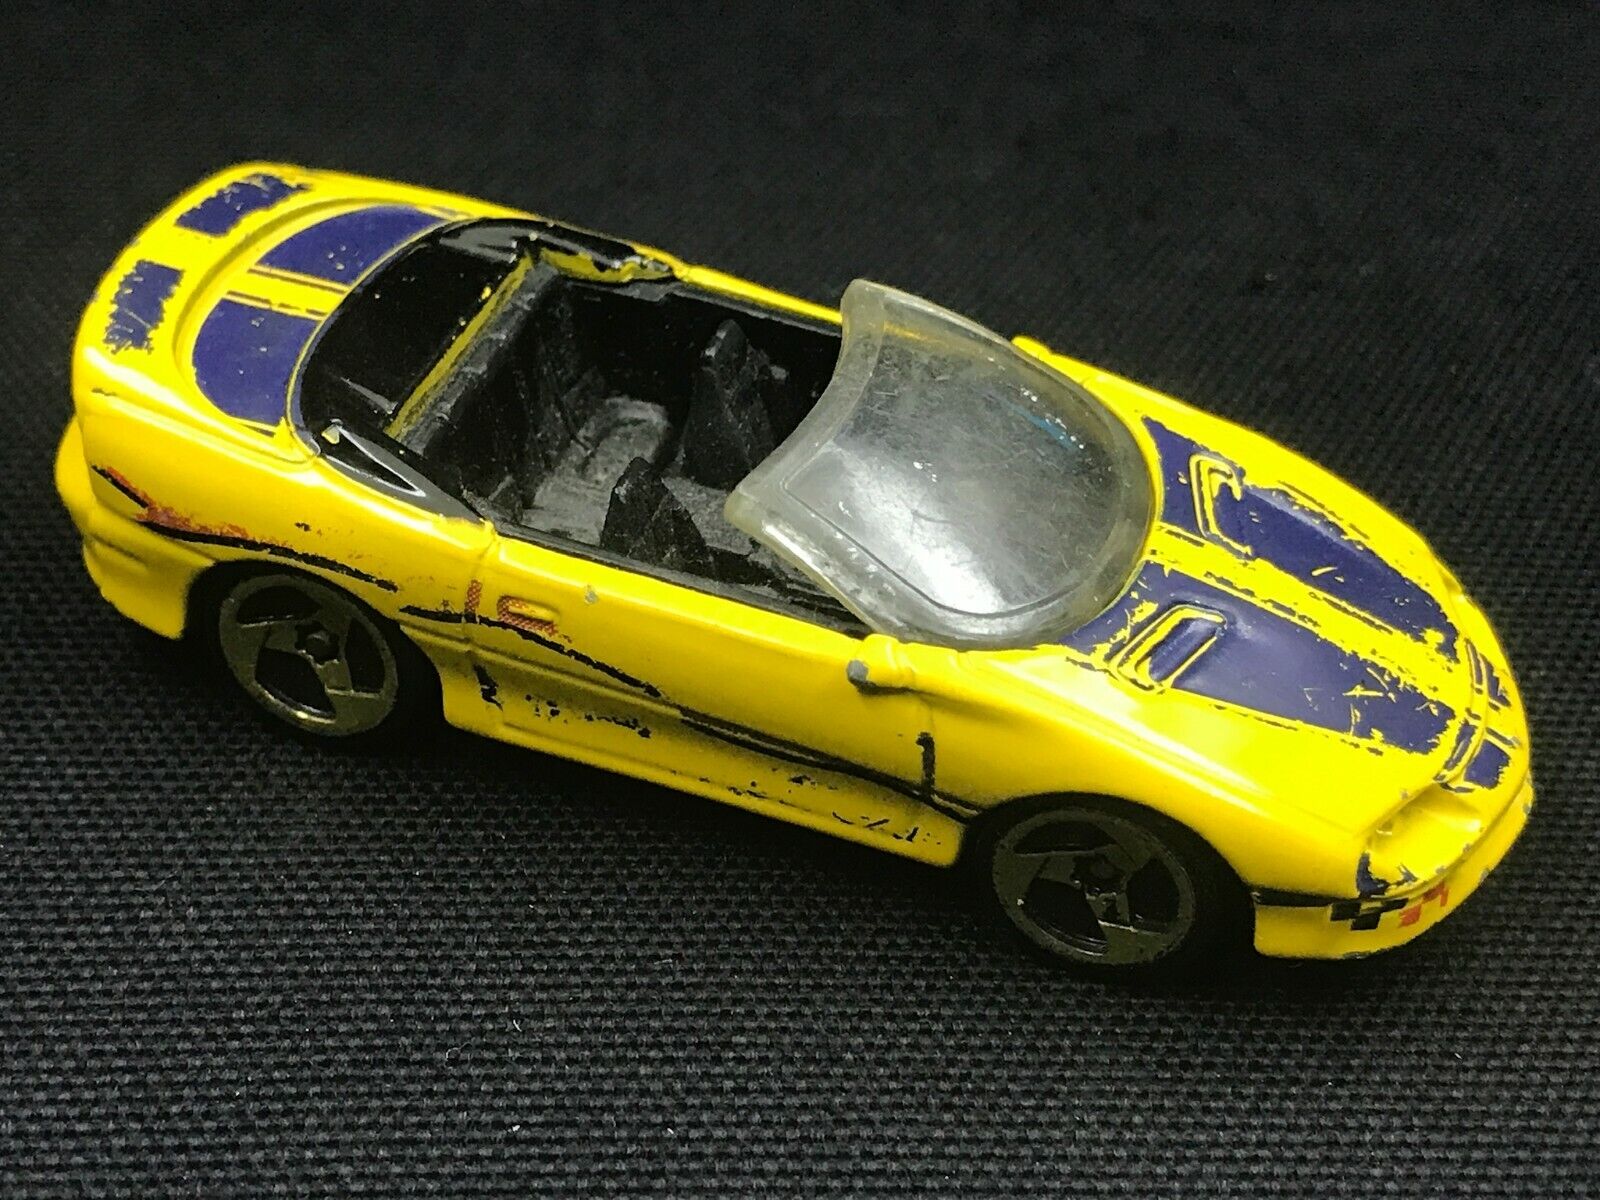 Hot Wheels '95 Camero Diecast Collectable Scale 1:64